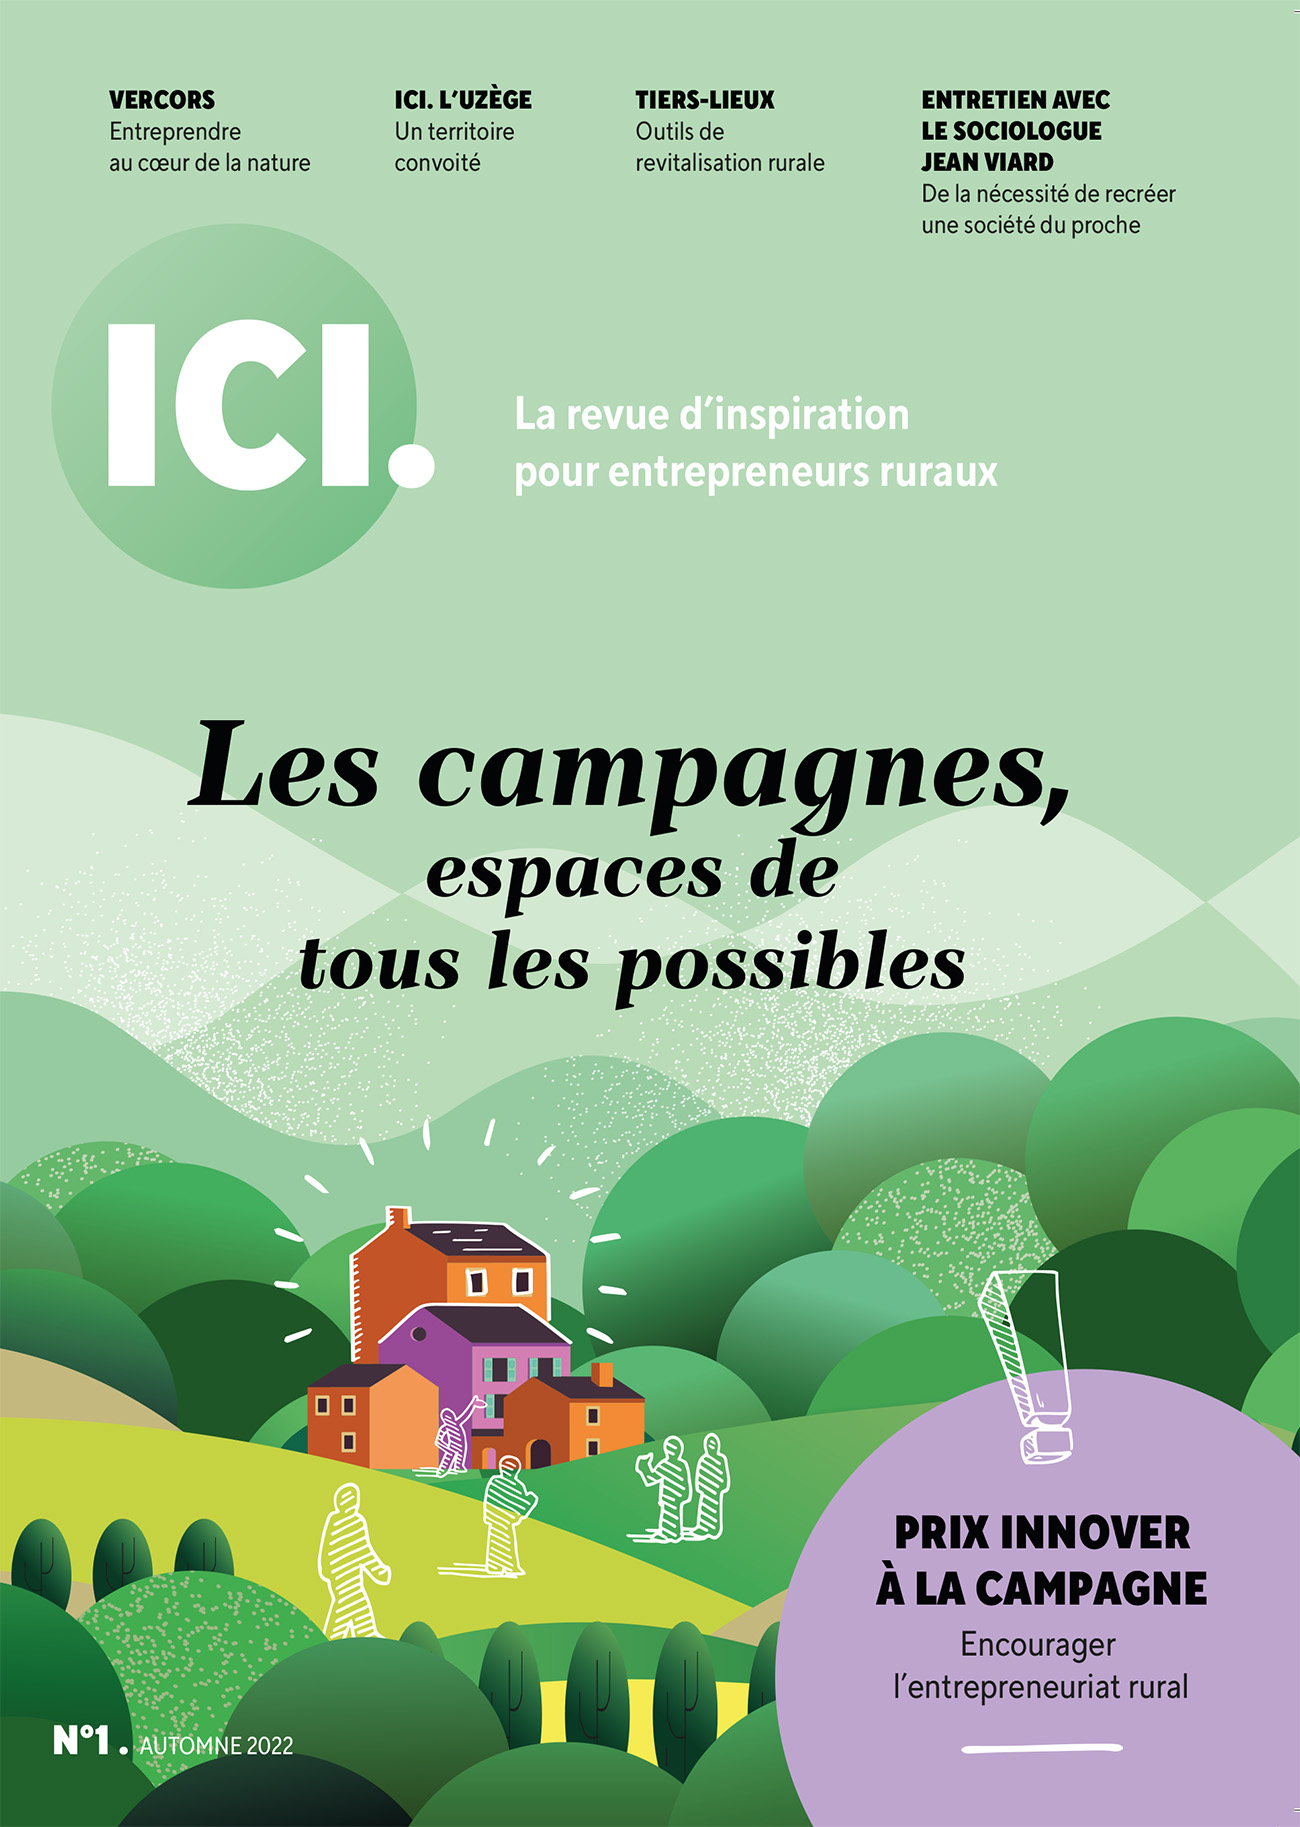 ici-l-agence-couverture-revue-ICI. N°1